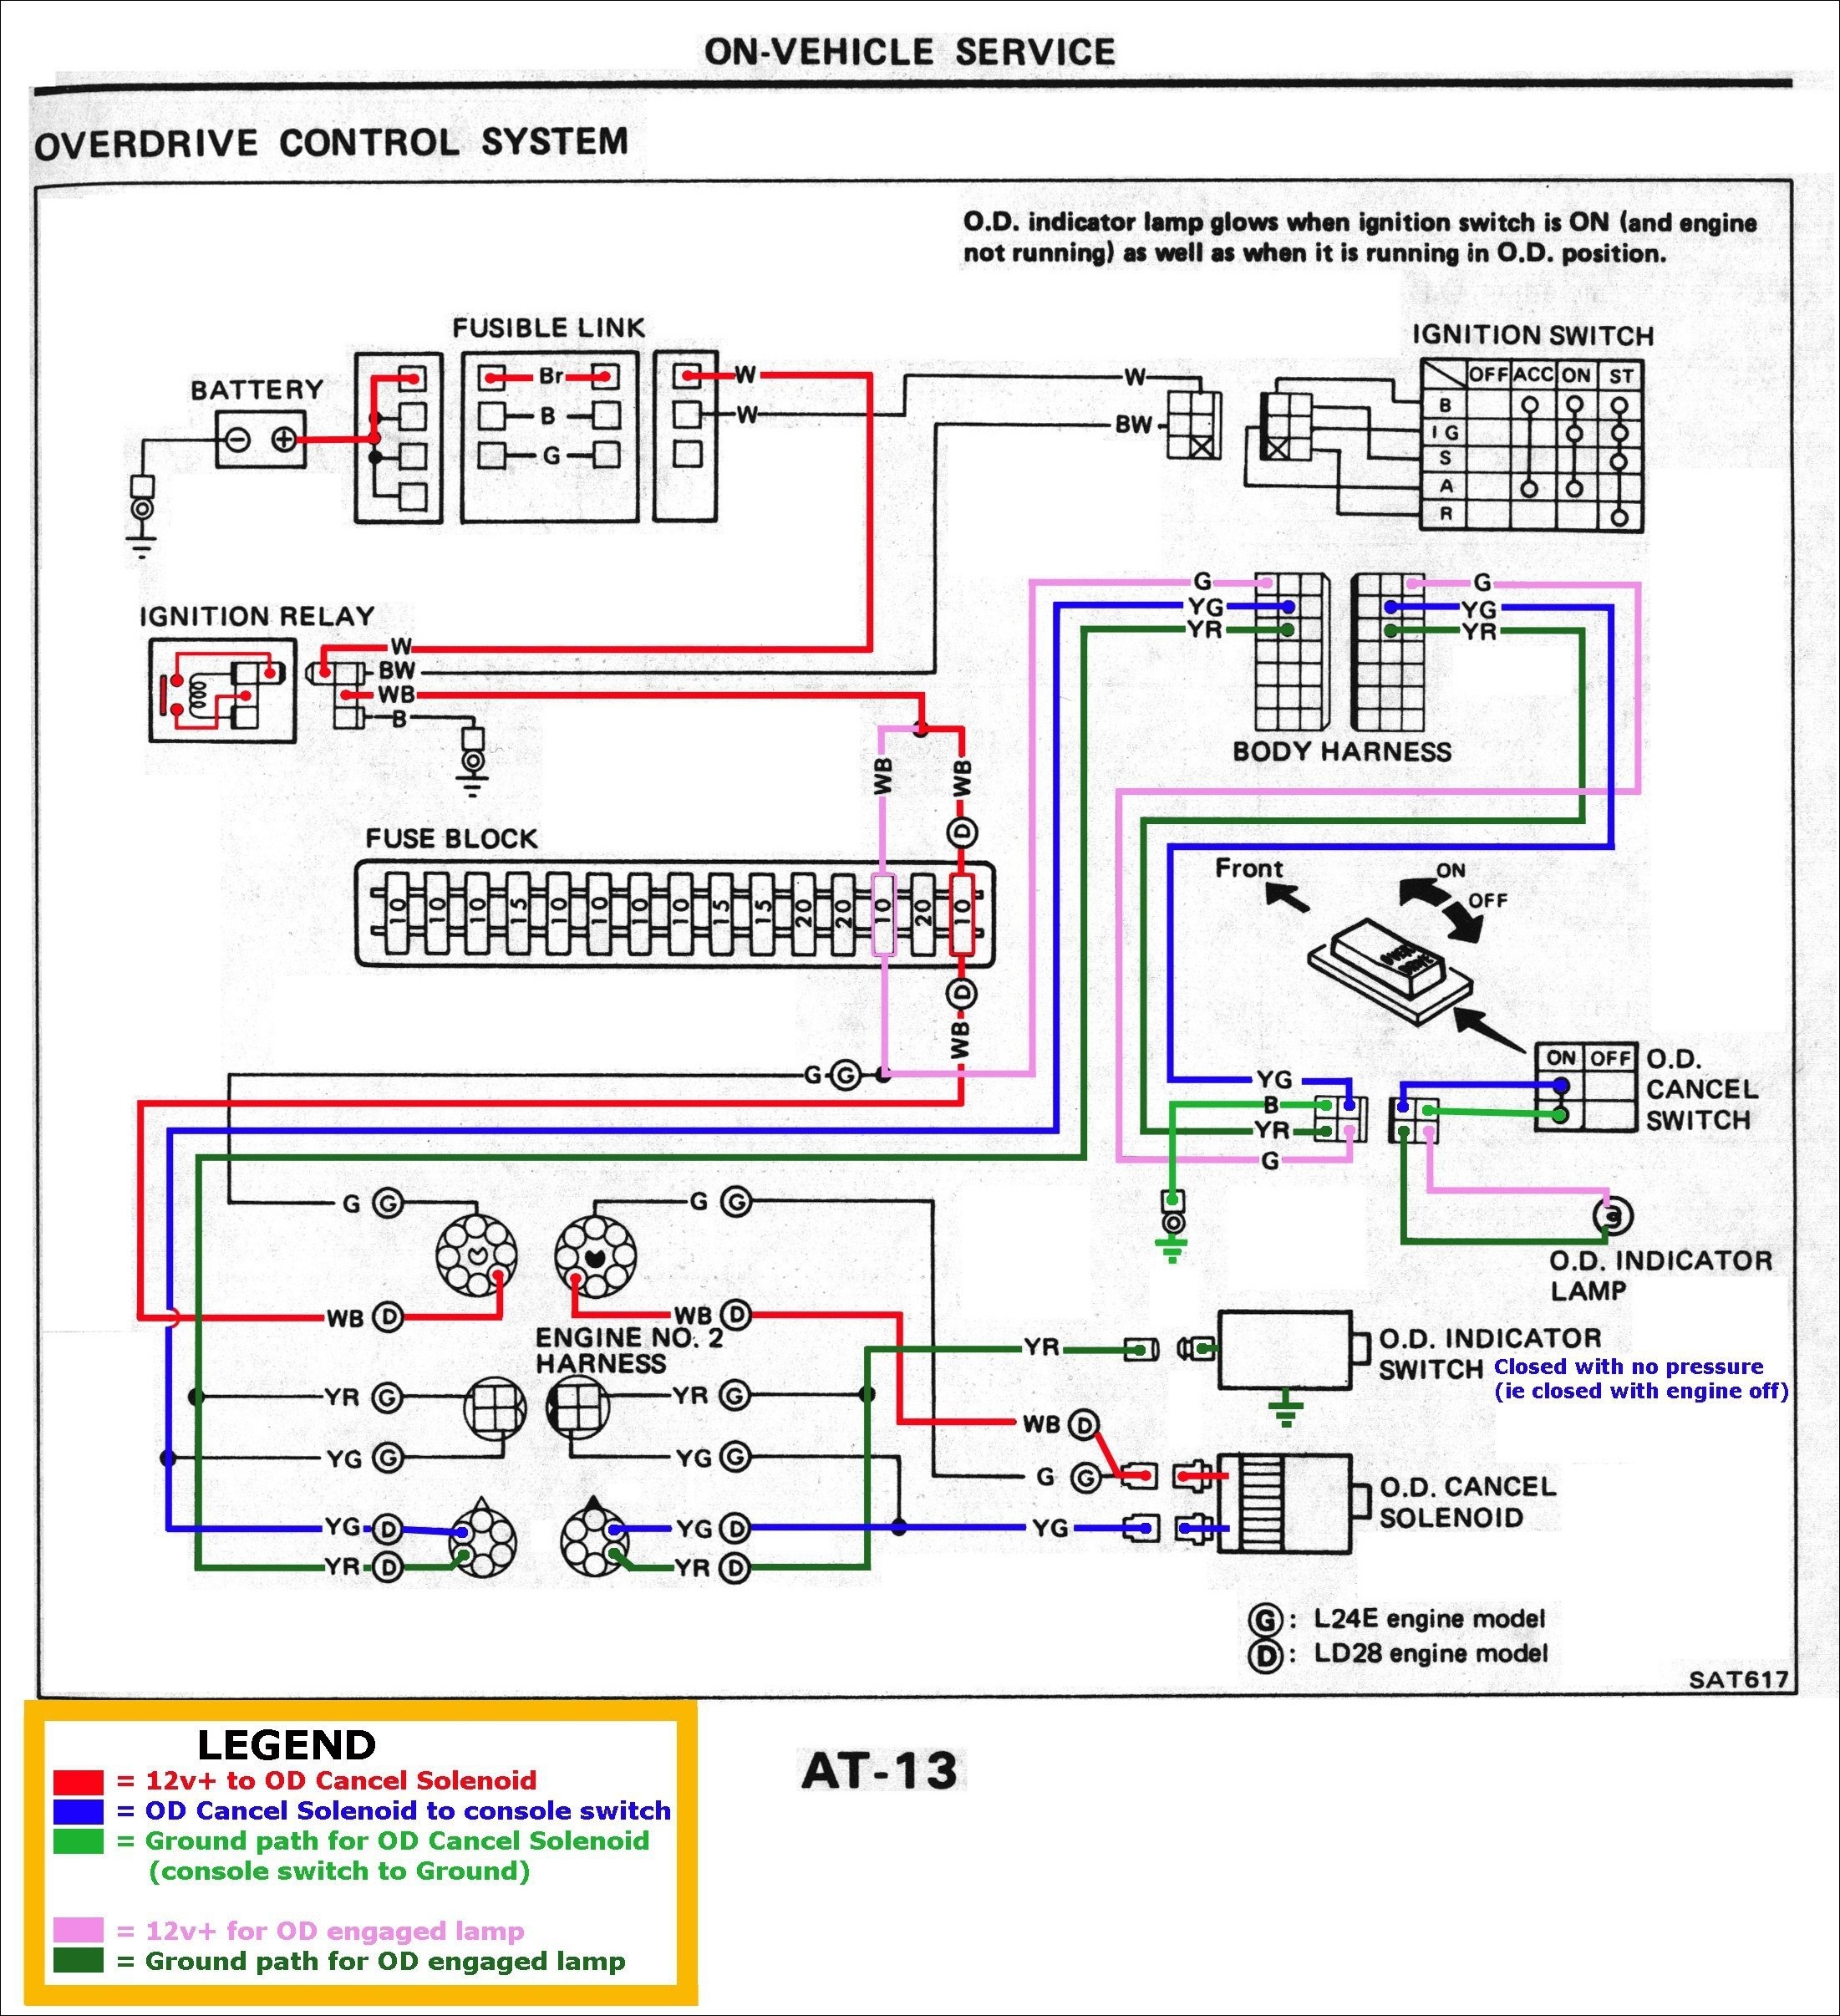 How to Read A Wiring Diagram New Maxxima Light Wiring Diagram New How to Read